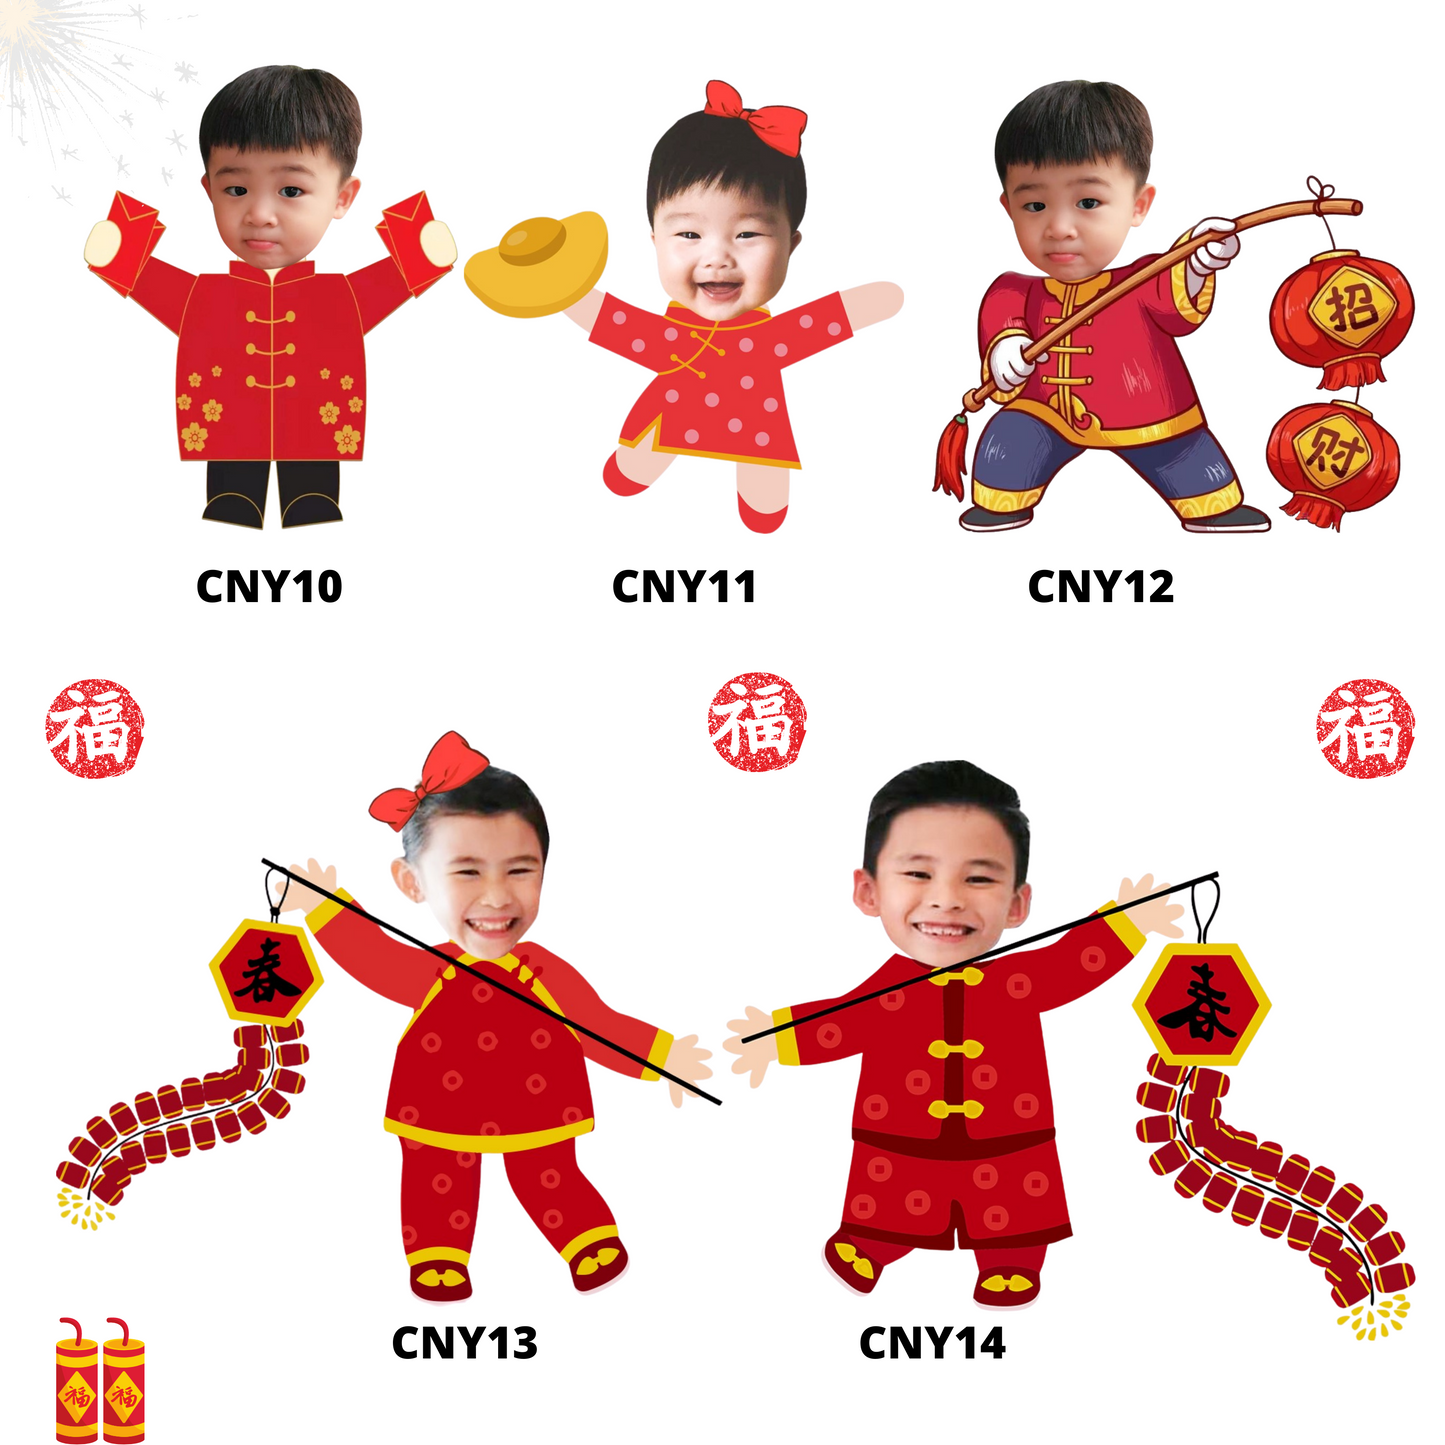 Personalized Chinese New Year Design Keychain Magnet Ornaments Customized